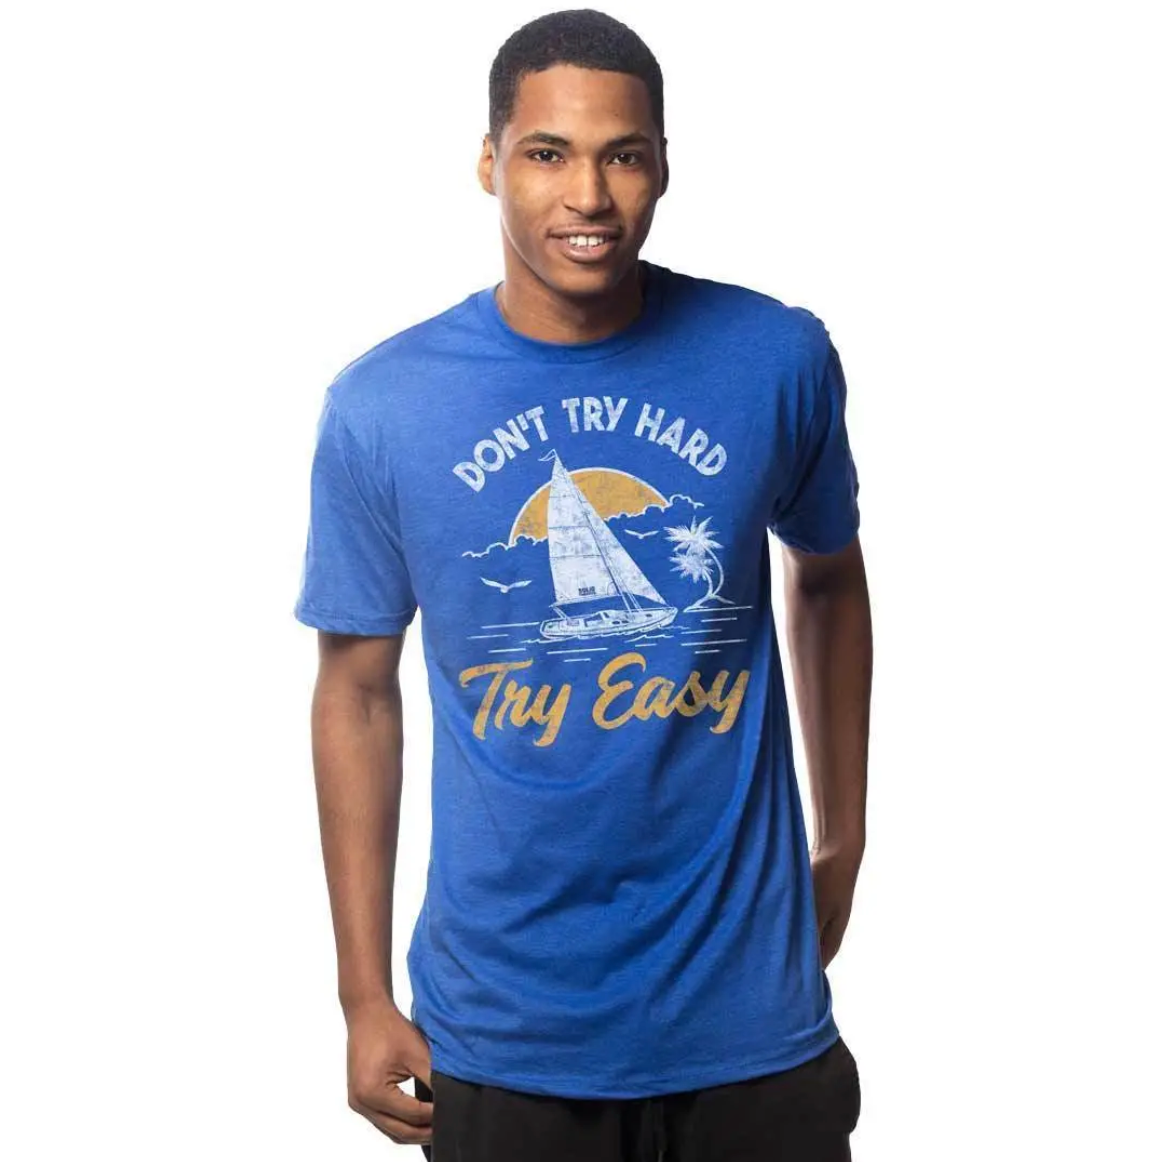 Don't Try Hard Try Easy Men's Cotton T-Shirt